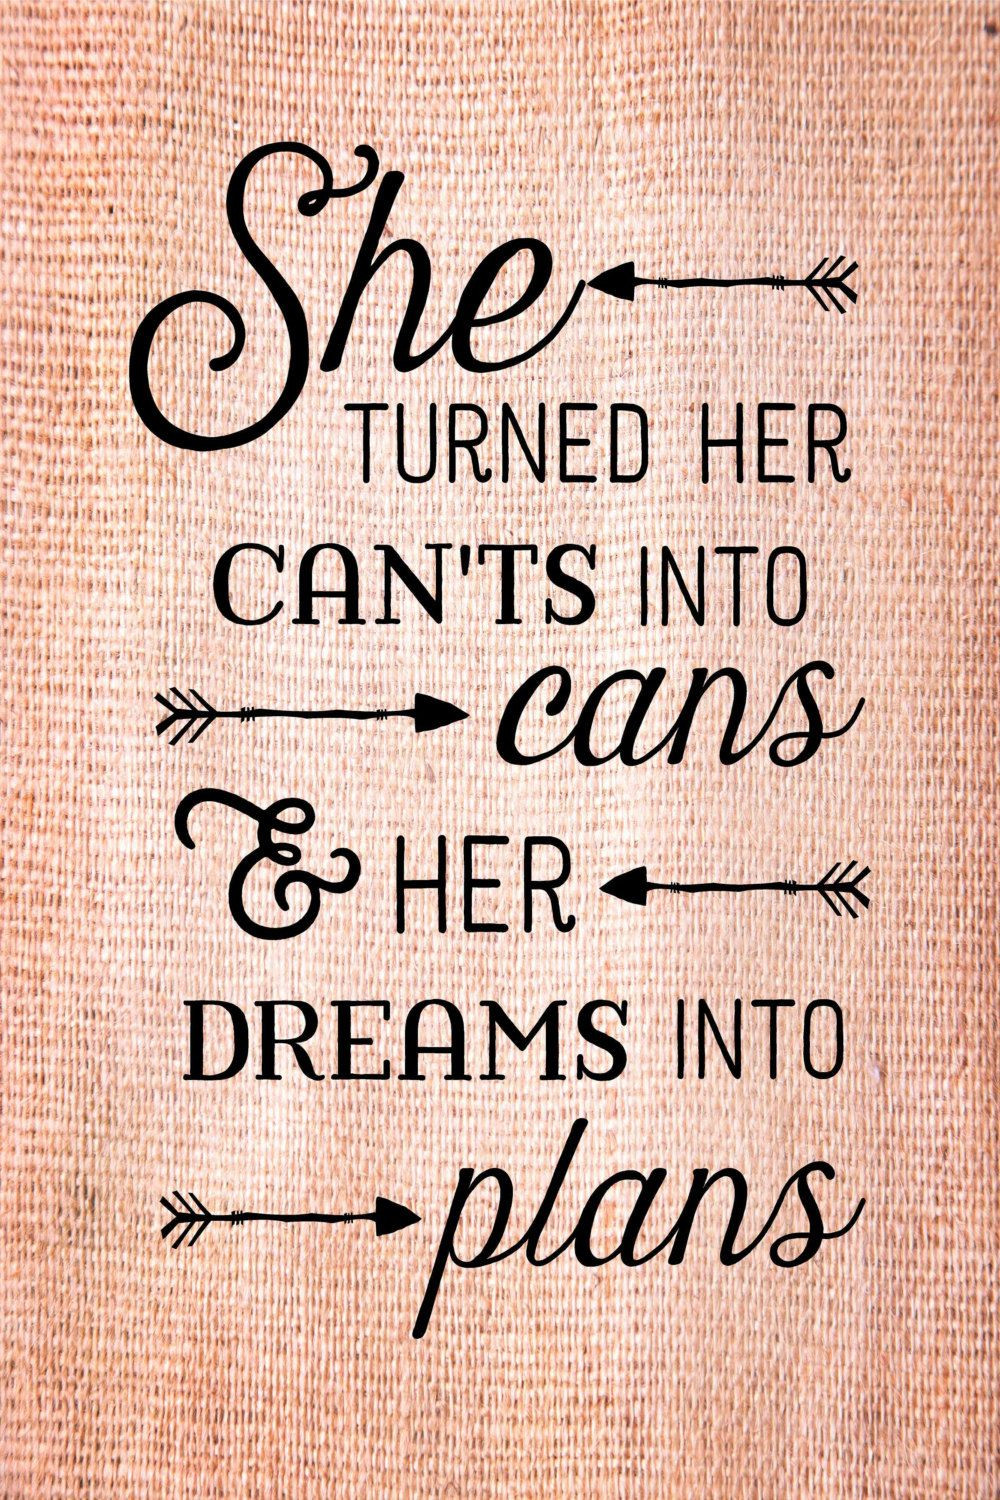 Inspirational Quotes For Graduation
 Graduation Gift She turned her can ts into cans dreams